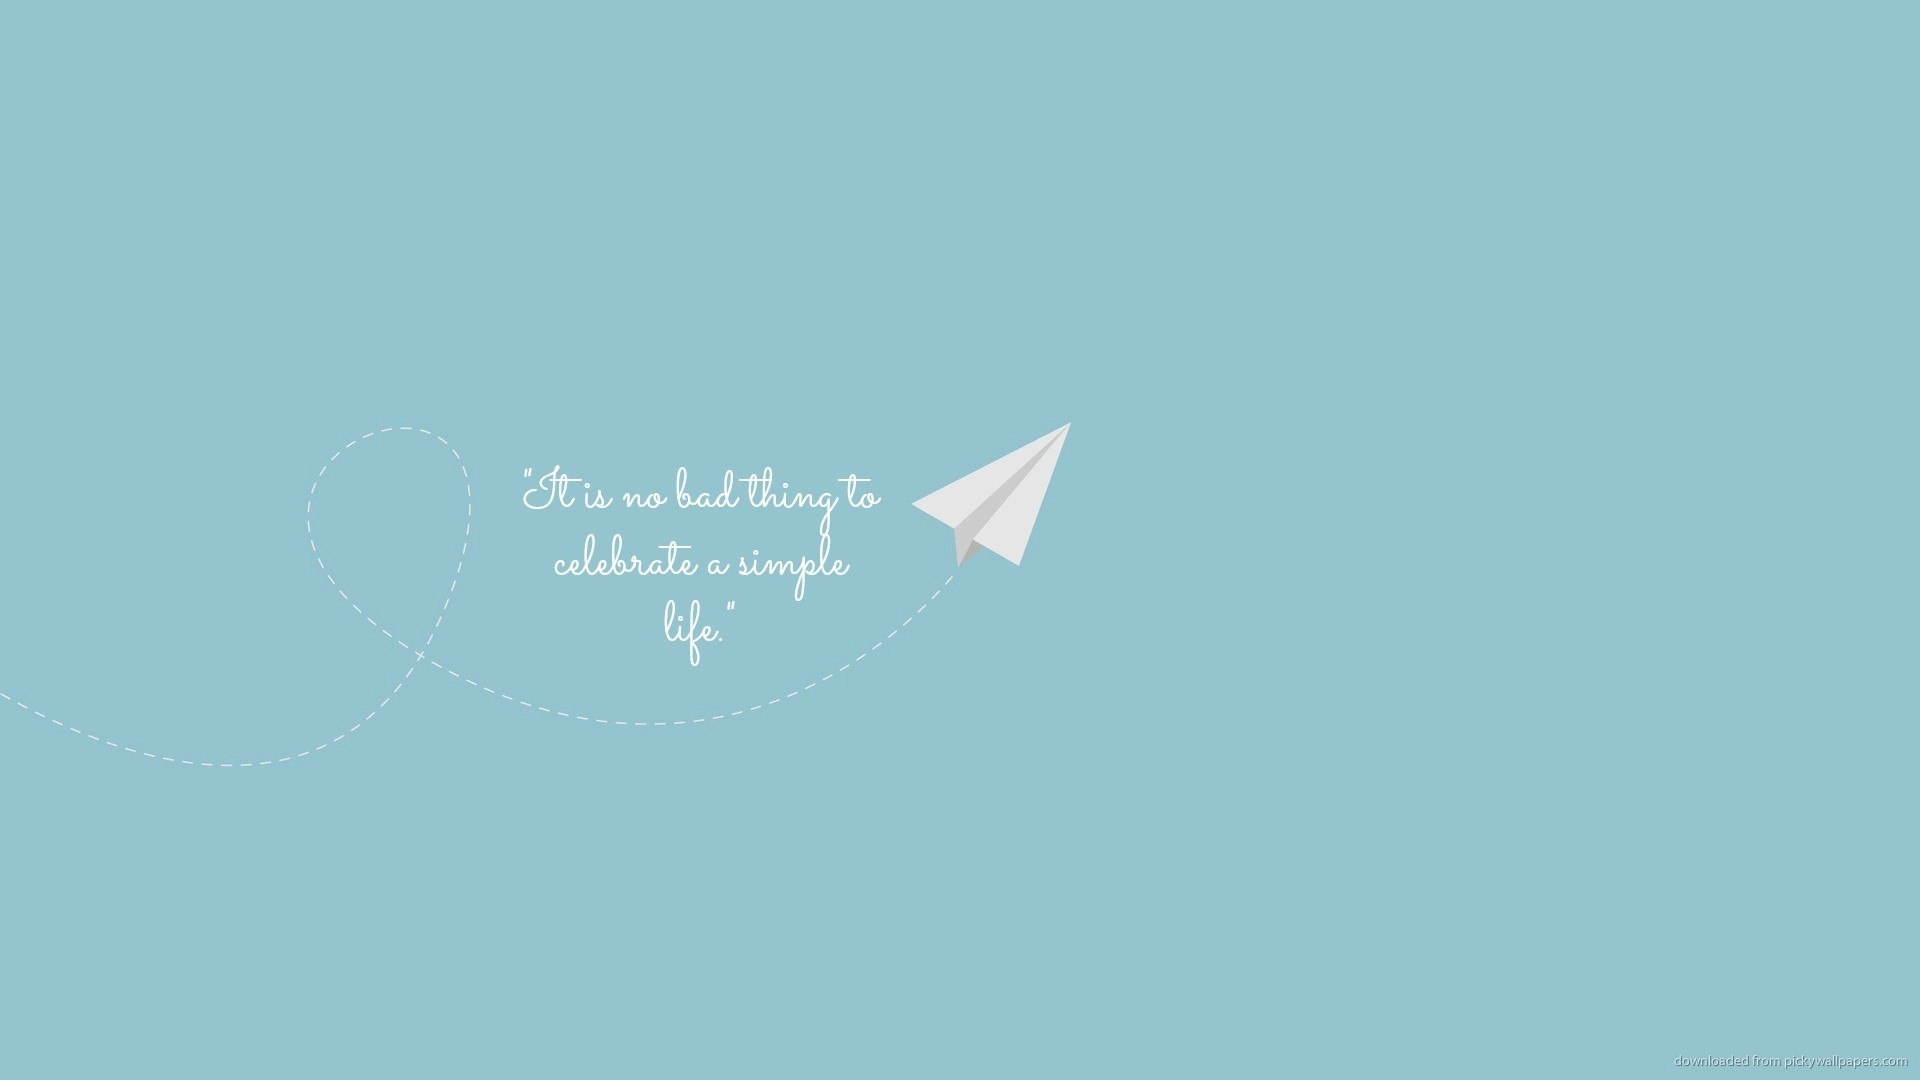 General 1920x1080 paper planes simple background motivational typography minimalism blue background